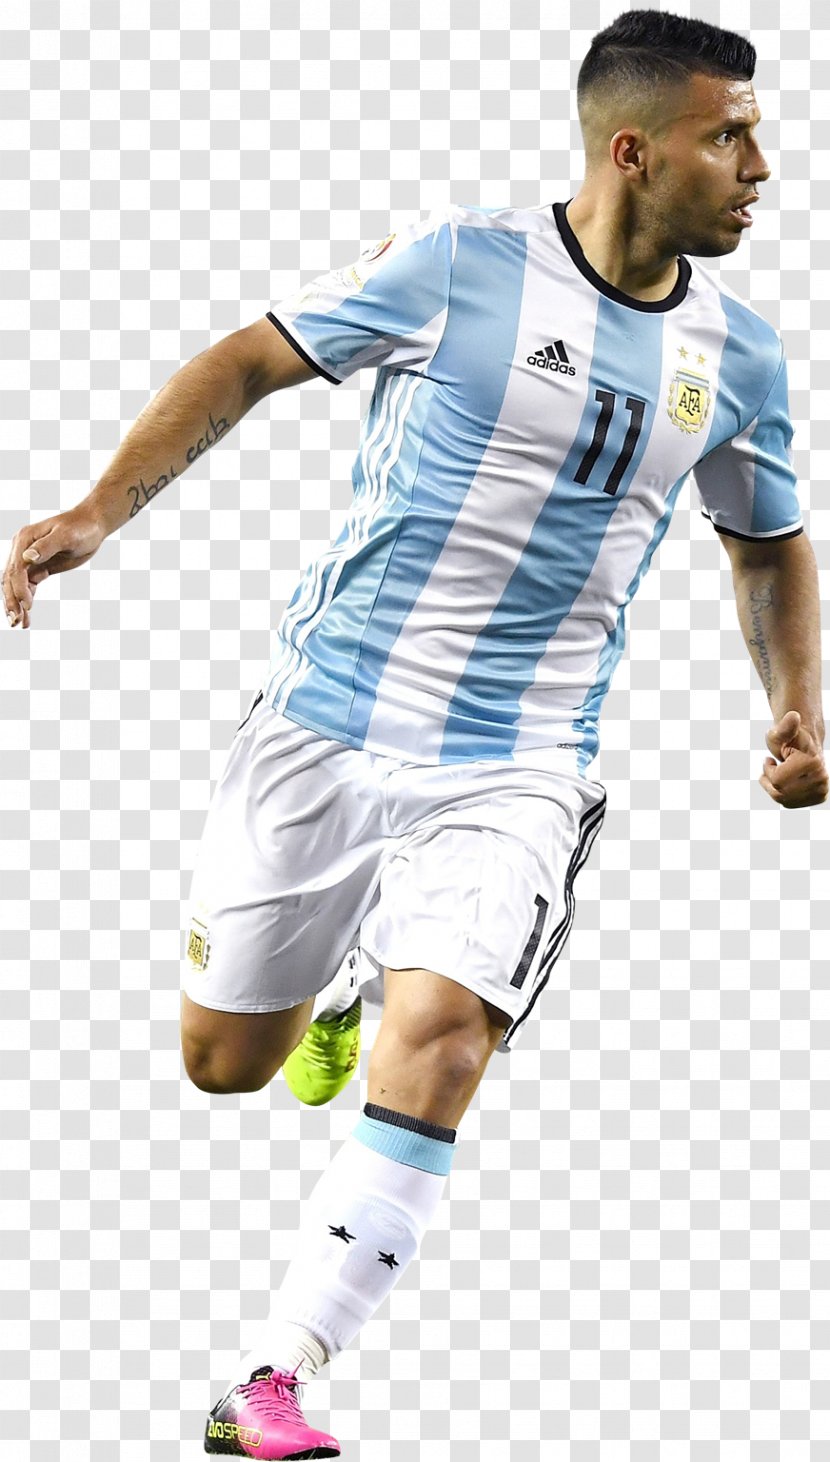 Sergio Agüero 2018 World Cup Argentina National Football Team Manchester City F.C. Jersey - Aguero Transparent PNG